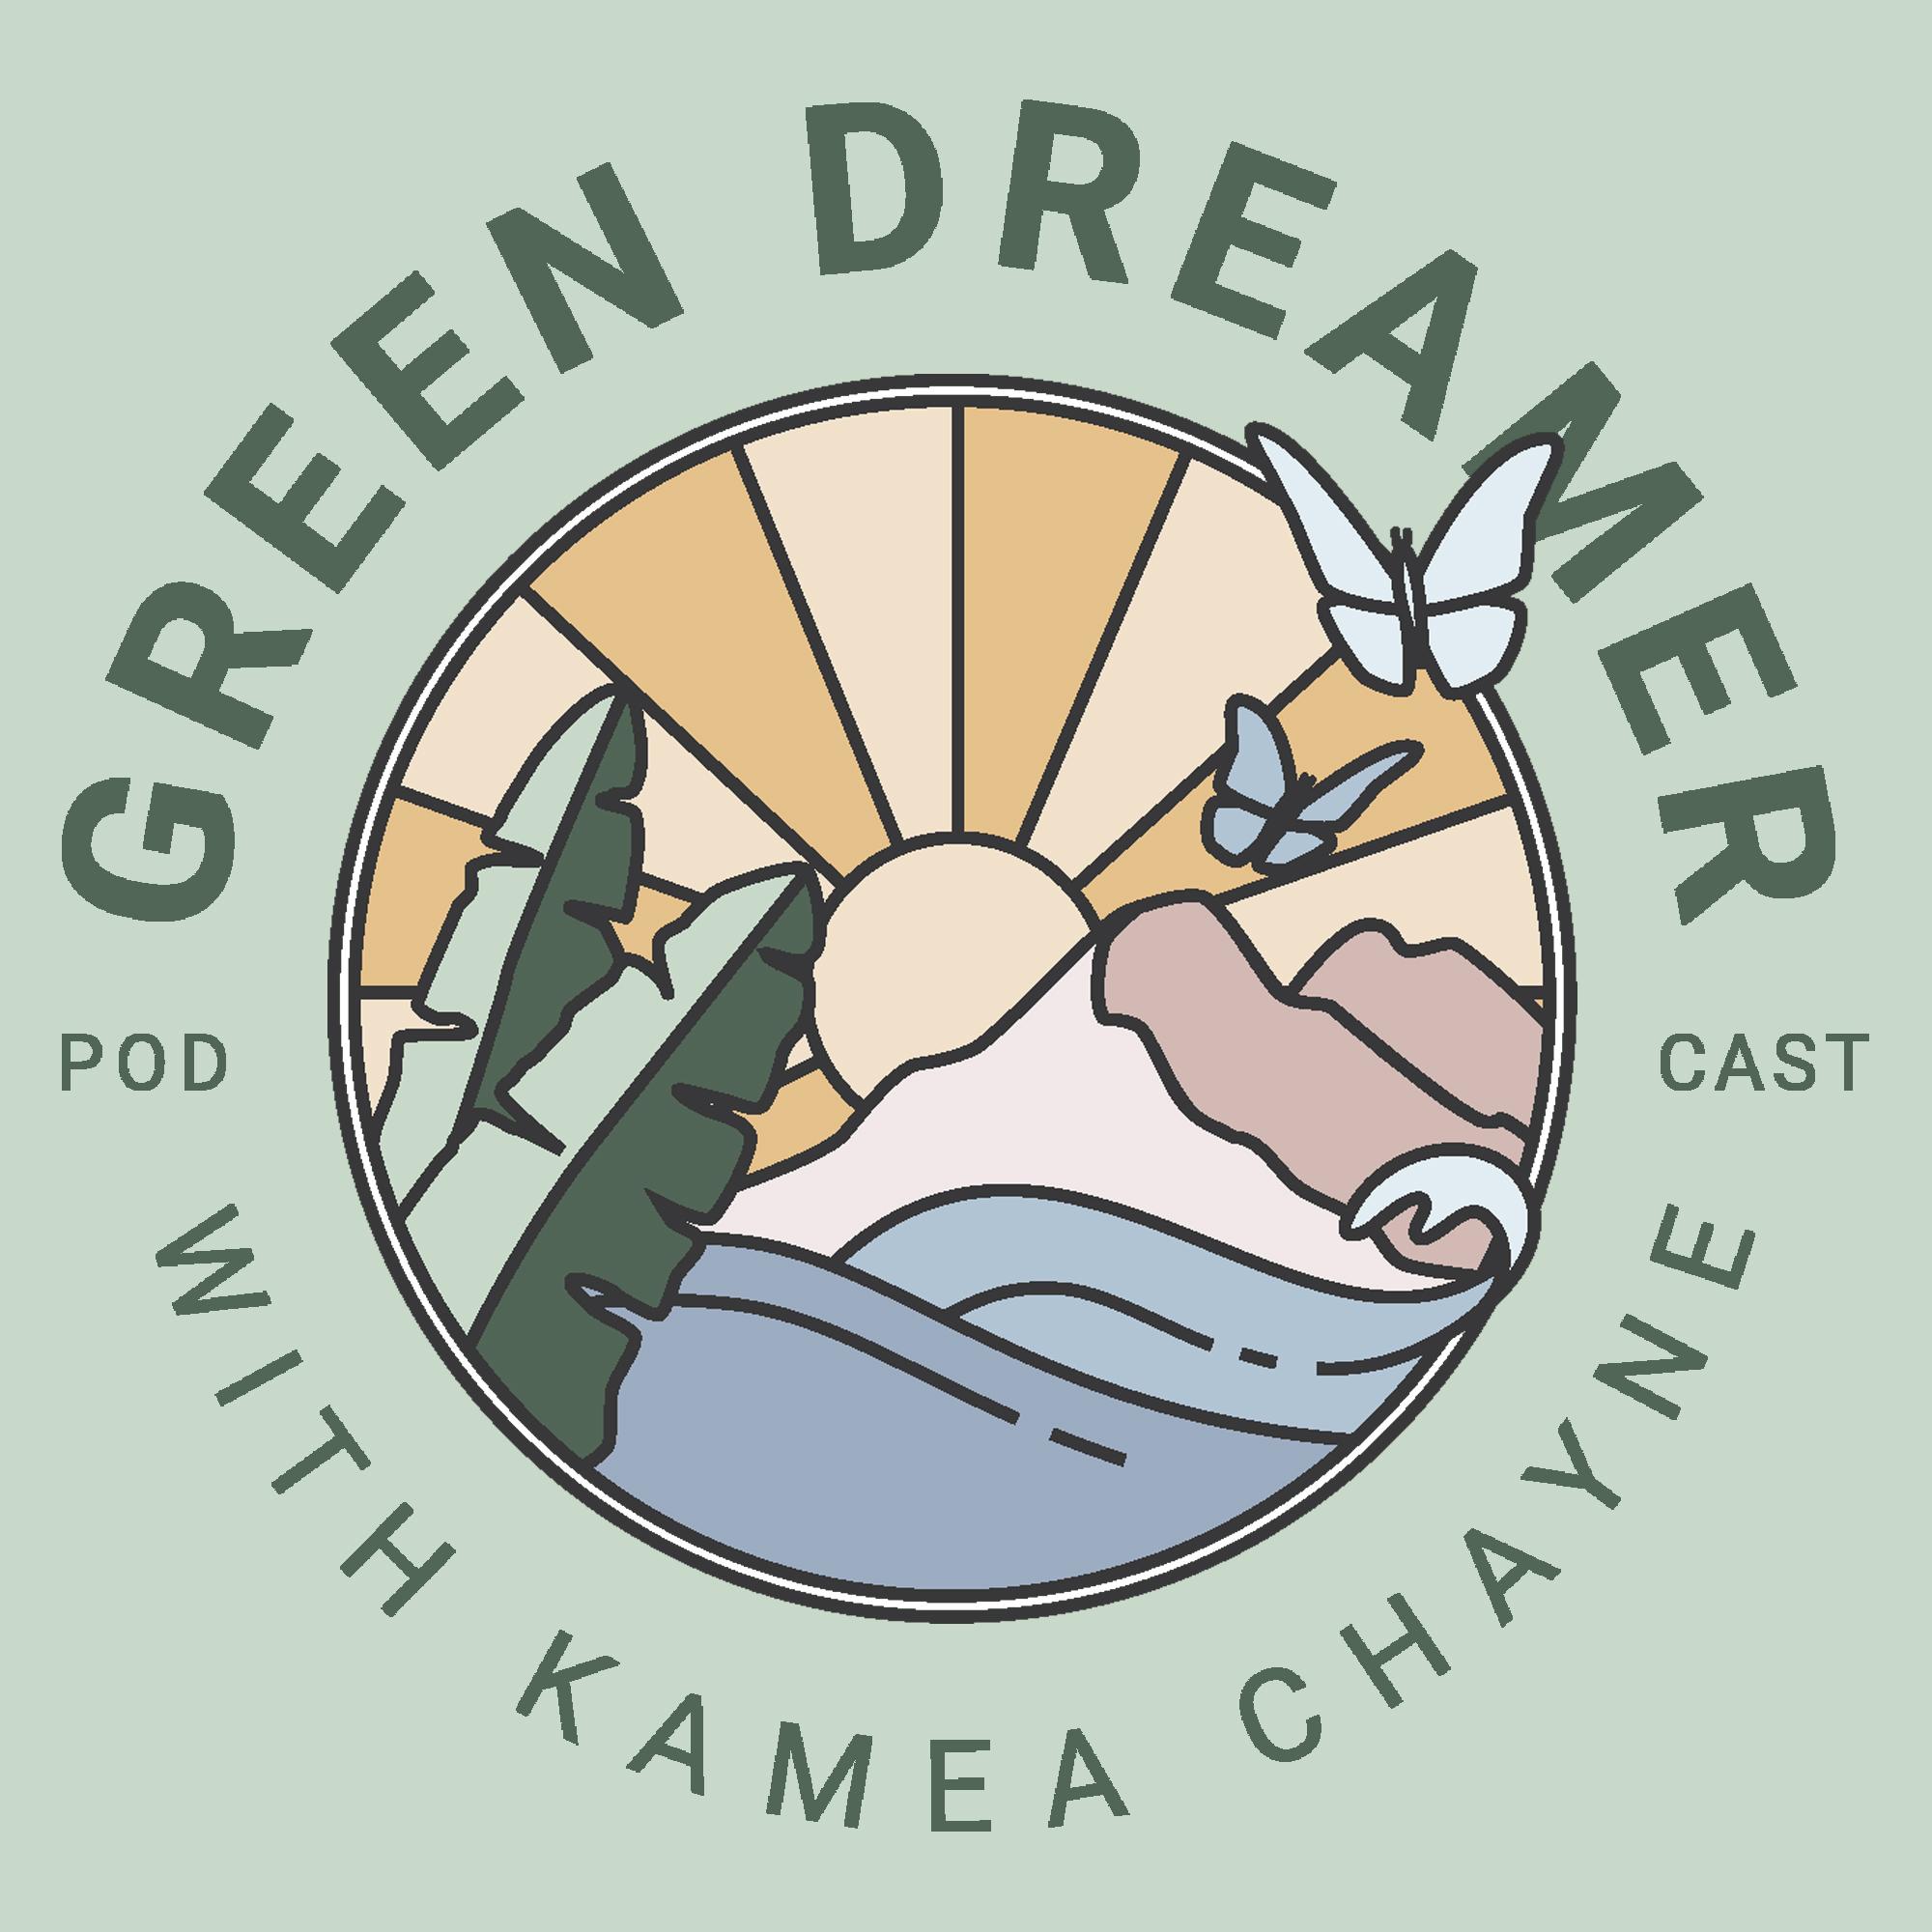 WHAT'S NEXT FOR GREEN DREAMER